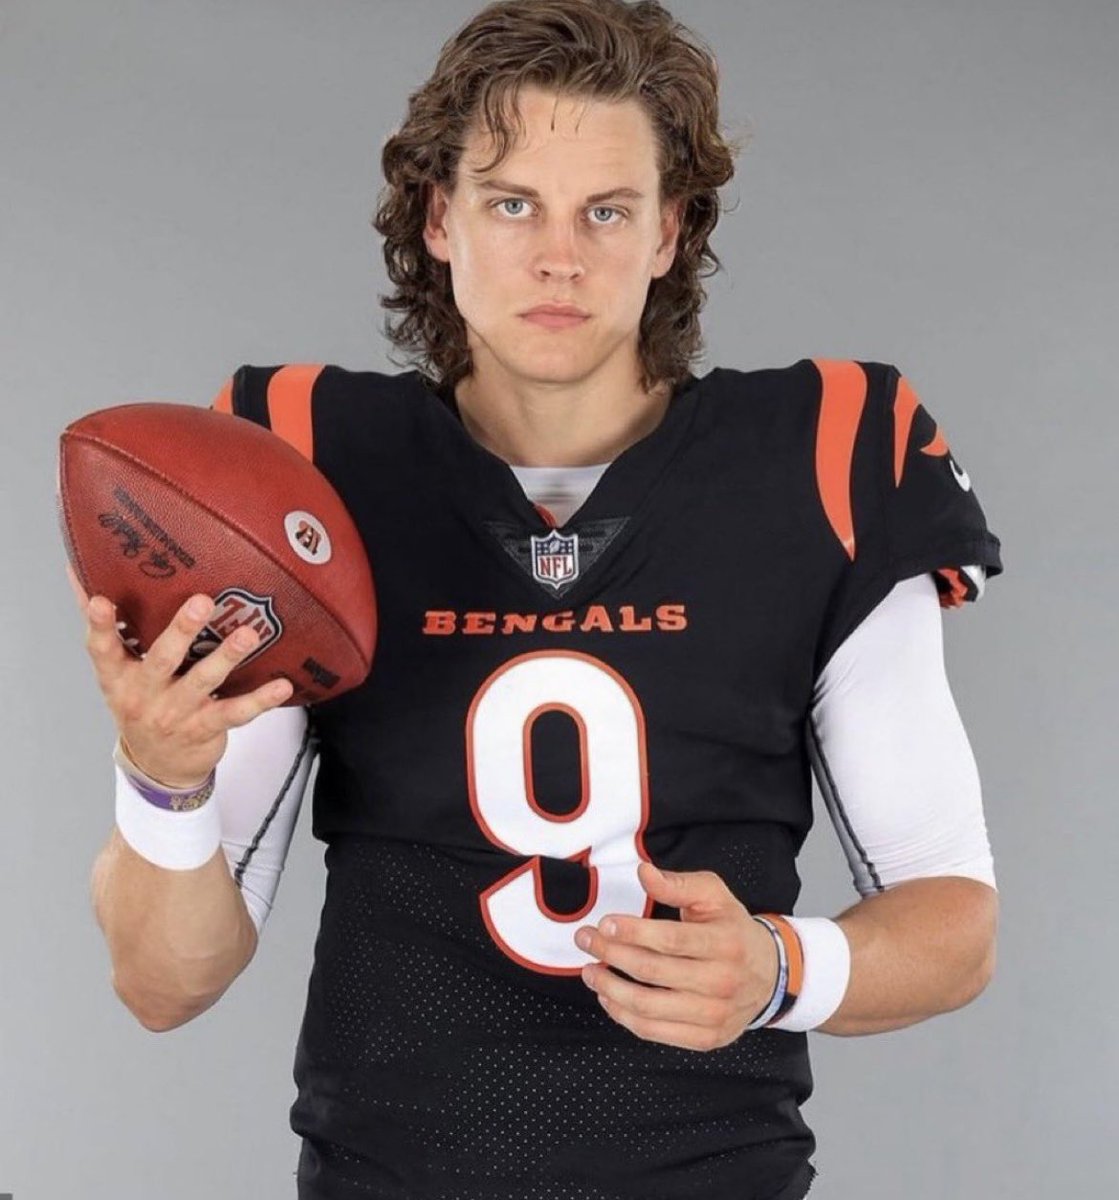 For the sake of any young Bengals fans, please do not underestimate Joe Burrow’s power.